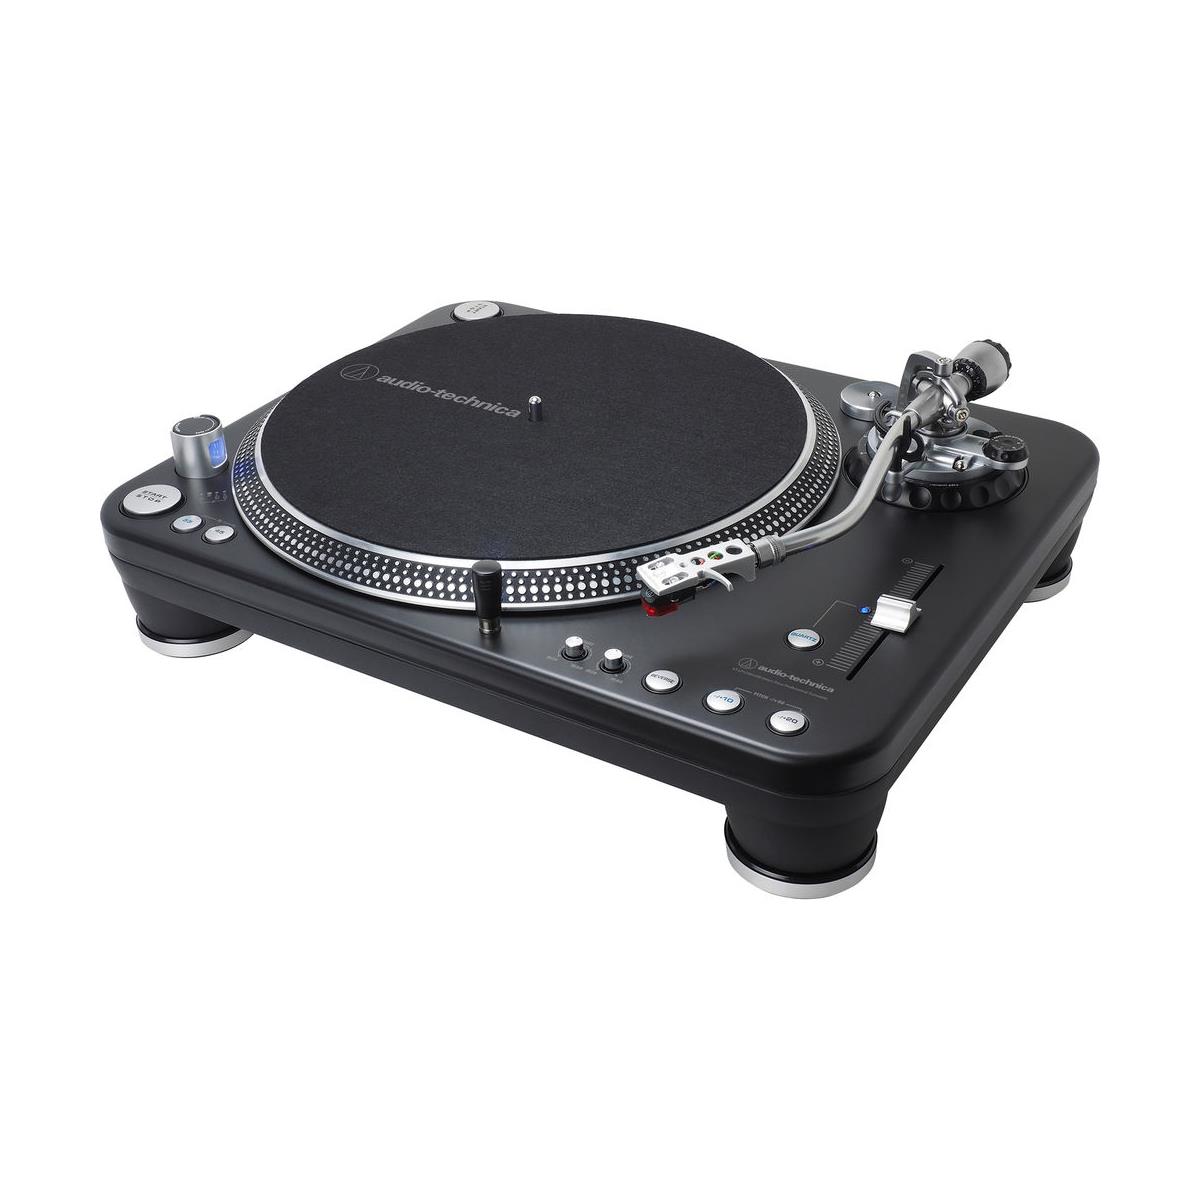 Image of Audio-Technica AT-LP1240-USB XP Direct-Drive Pro DJ Turntable